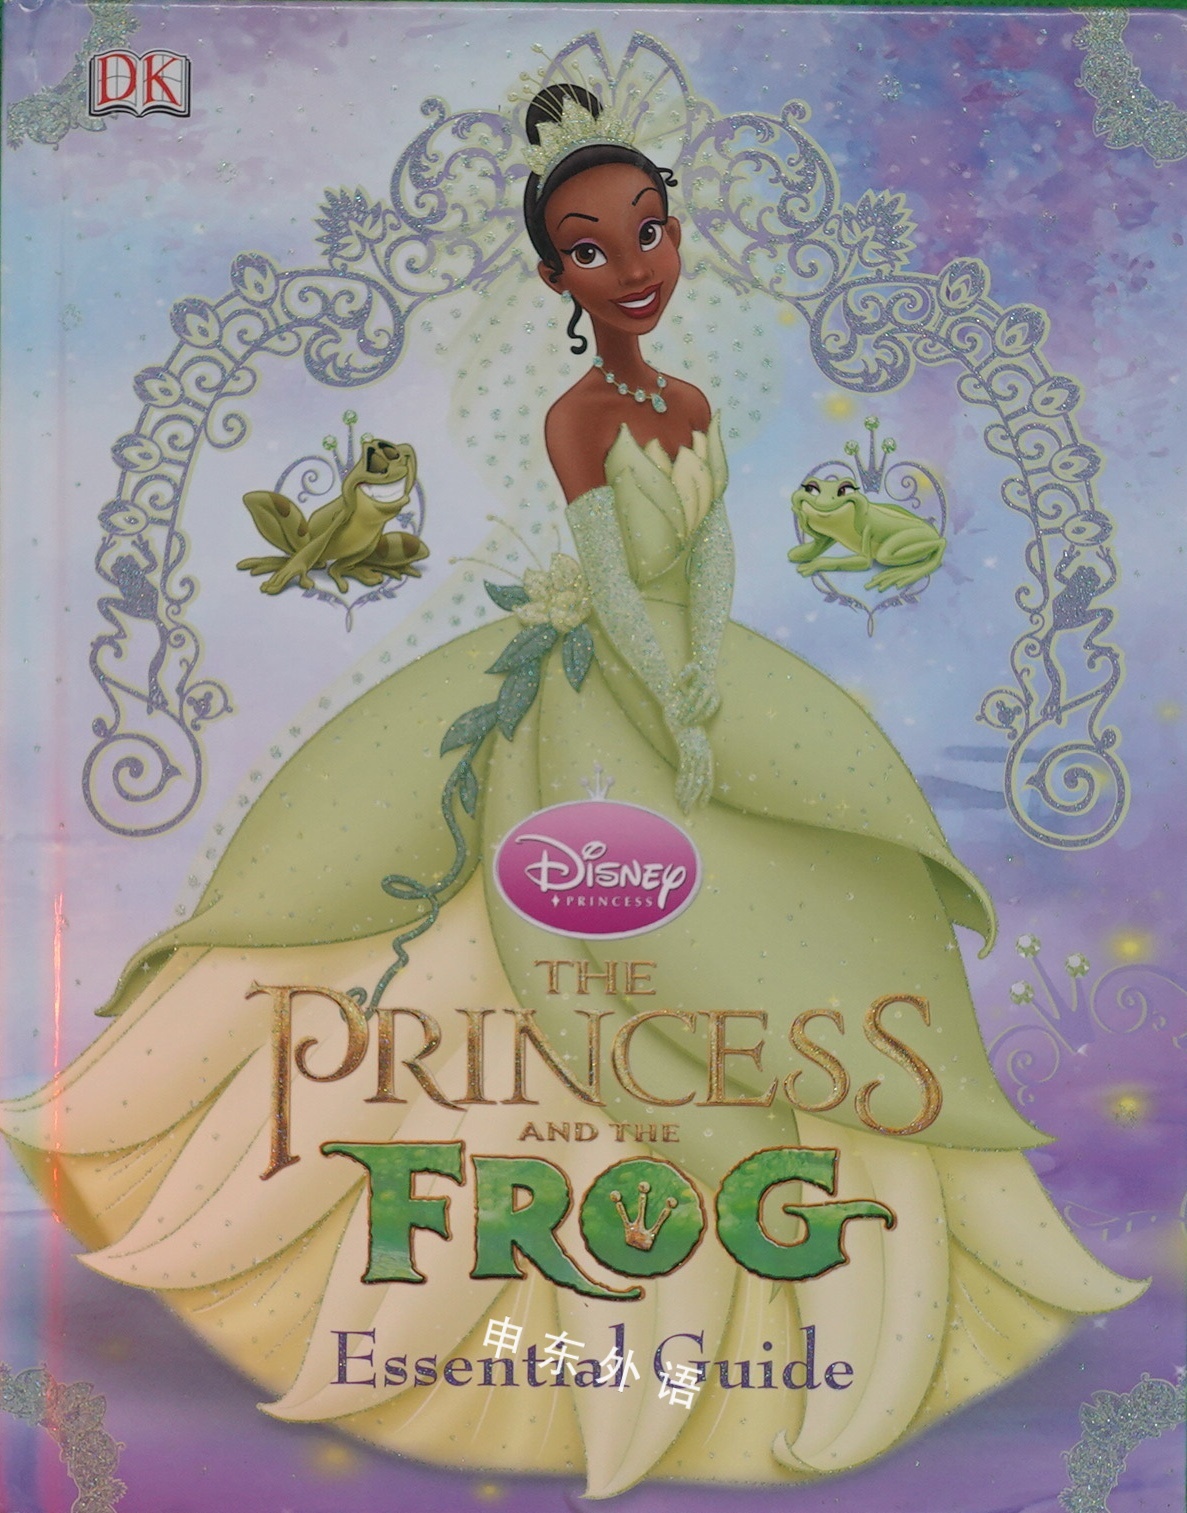 The Princess and the Frog: Essential Guide (